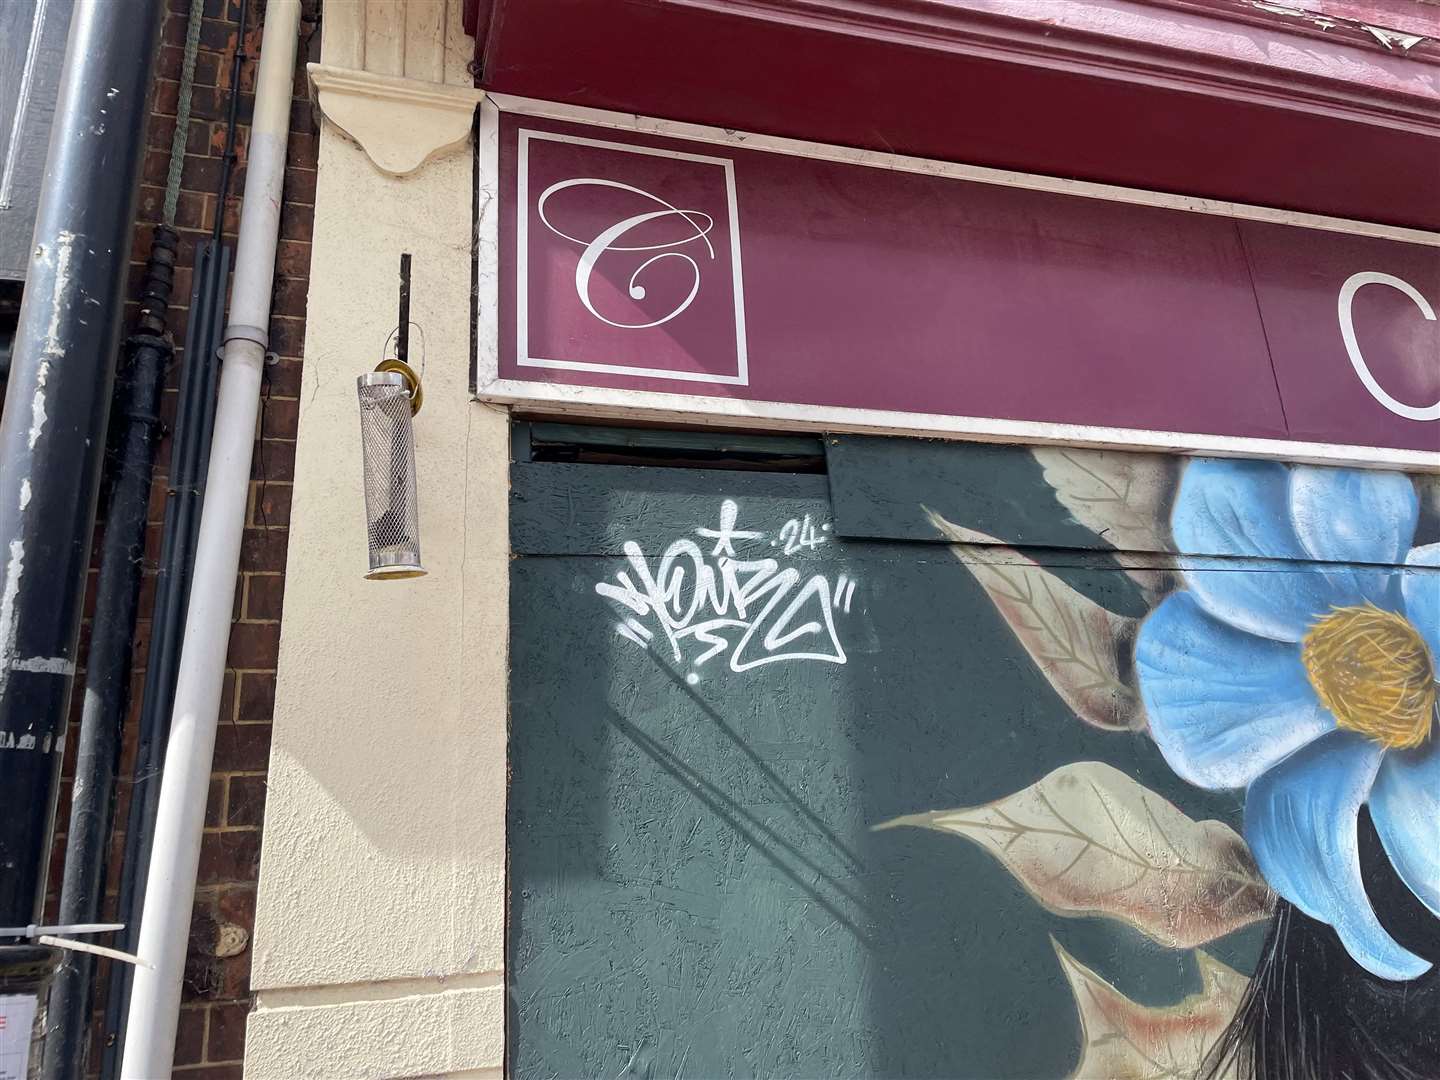 A tag has appeared in the corner of the mural